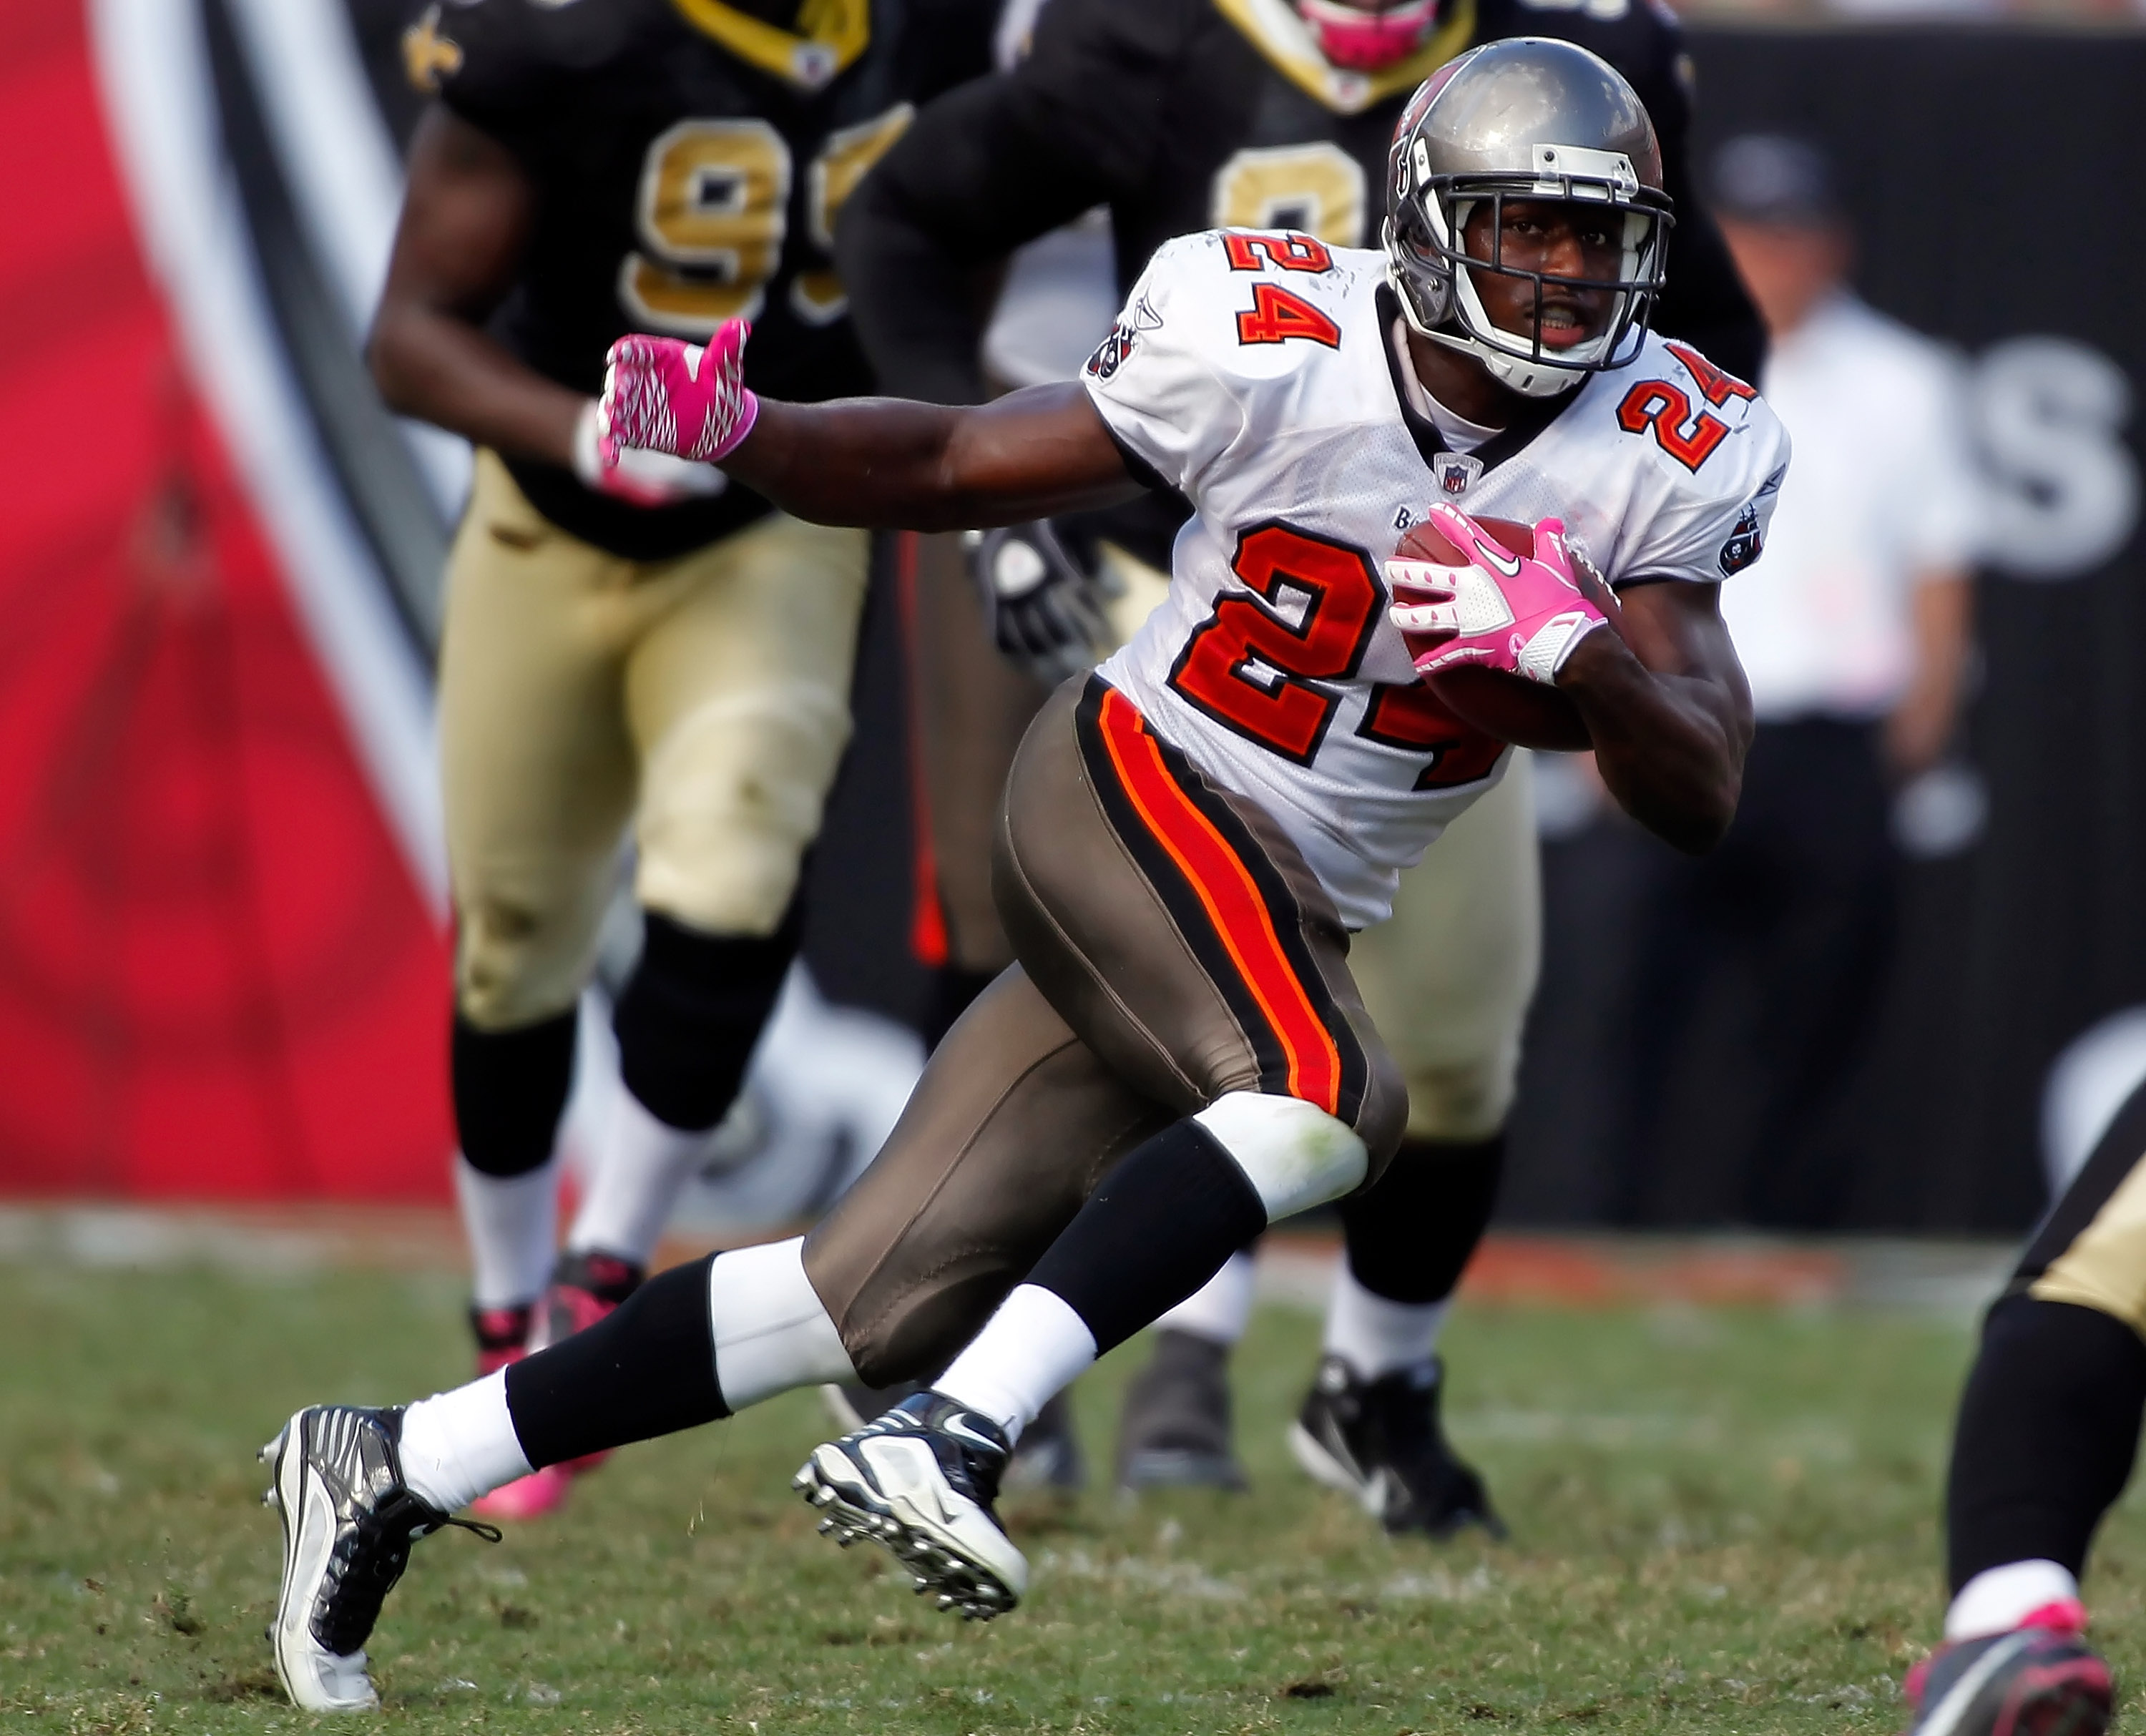 TAMPA, FL - OCTOBER 17:  Running back Carnell Williams #24 of the Tampa Bay Buccaneers runs the ball against the New Orleans Saints during the game at Raymond James Stadium on October 17, 2010 in Tampa, Florida.  (Photo by J. Meric/Getty Images)